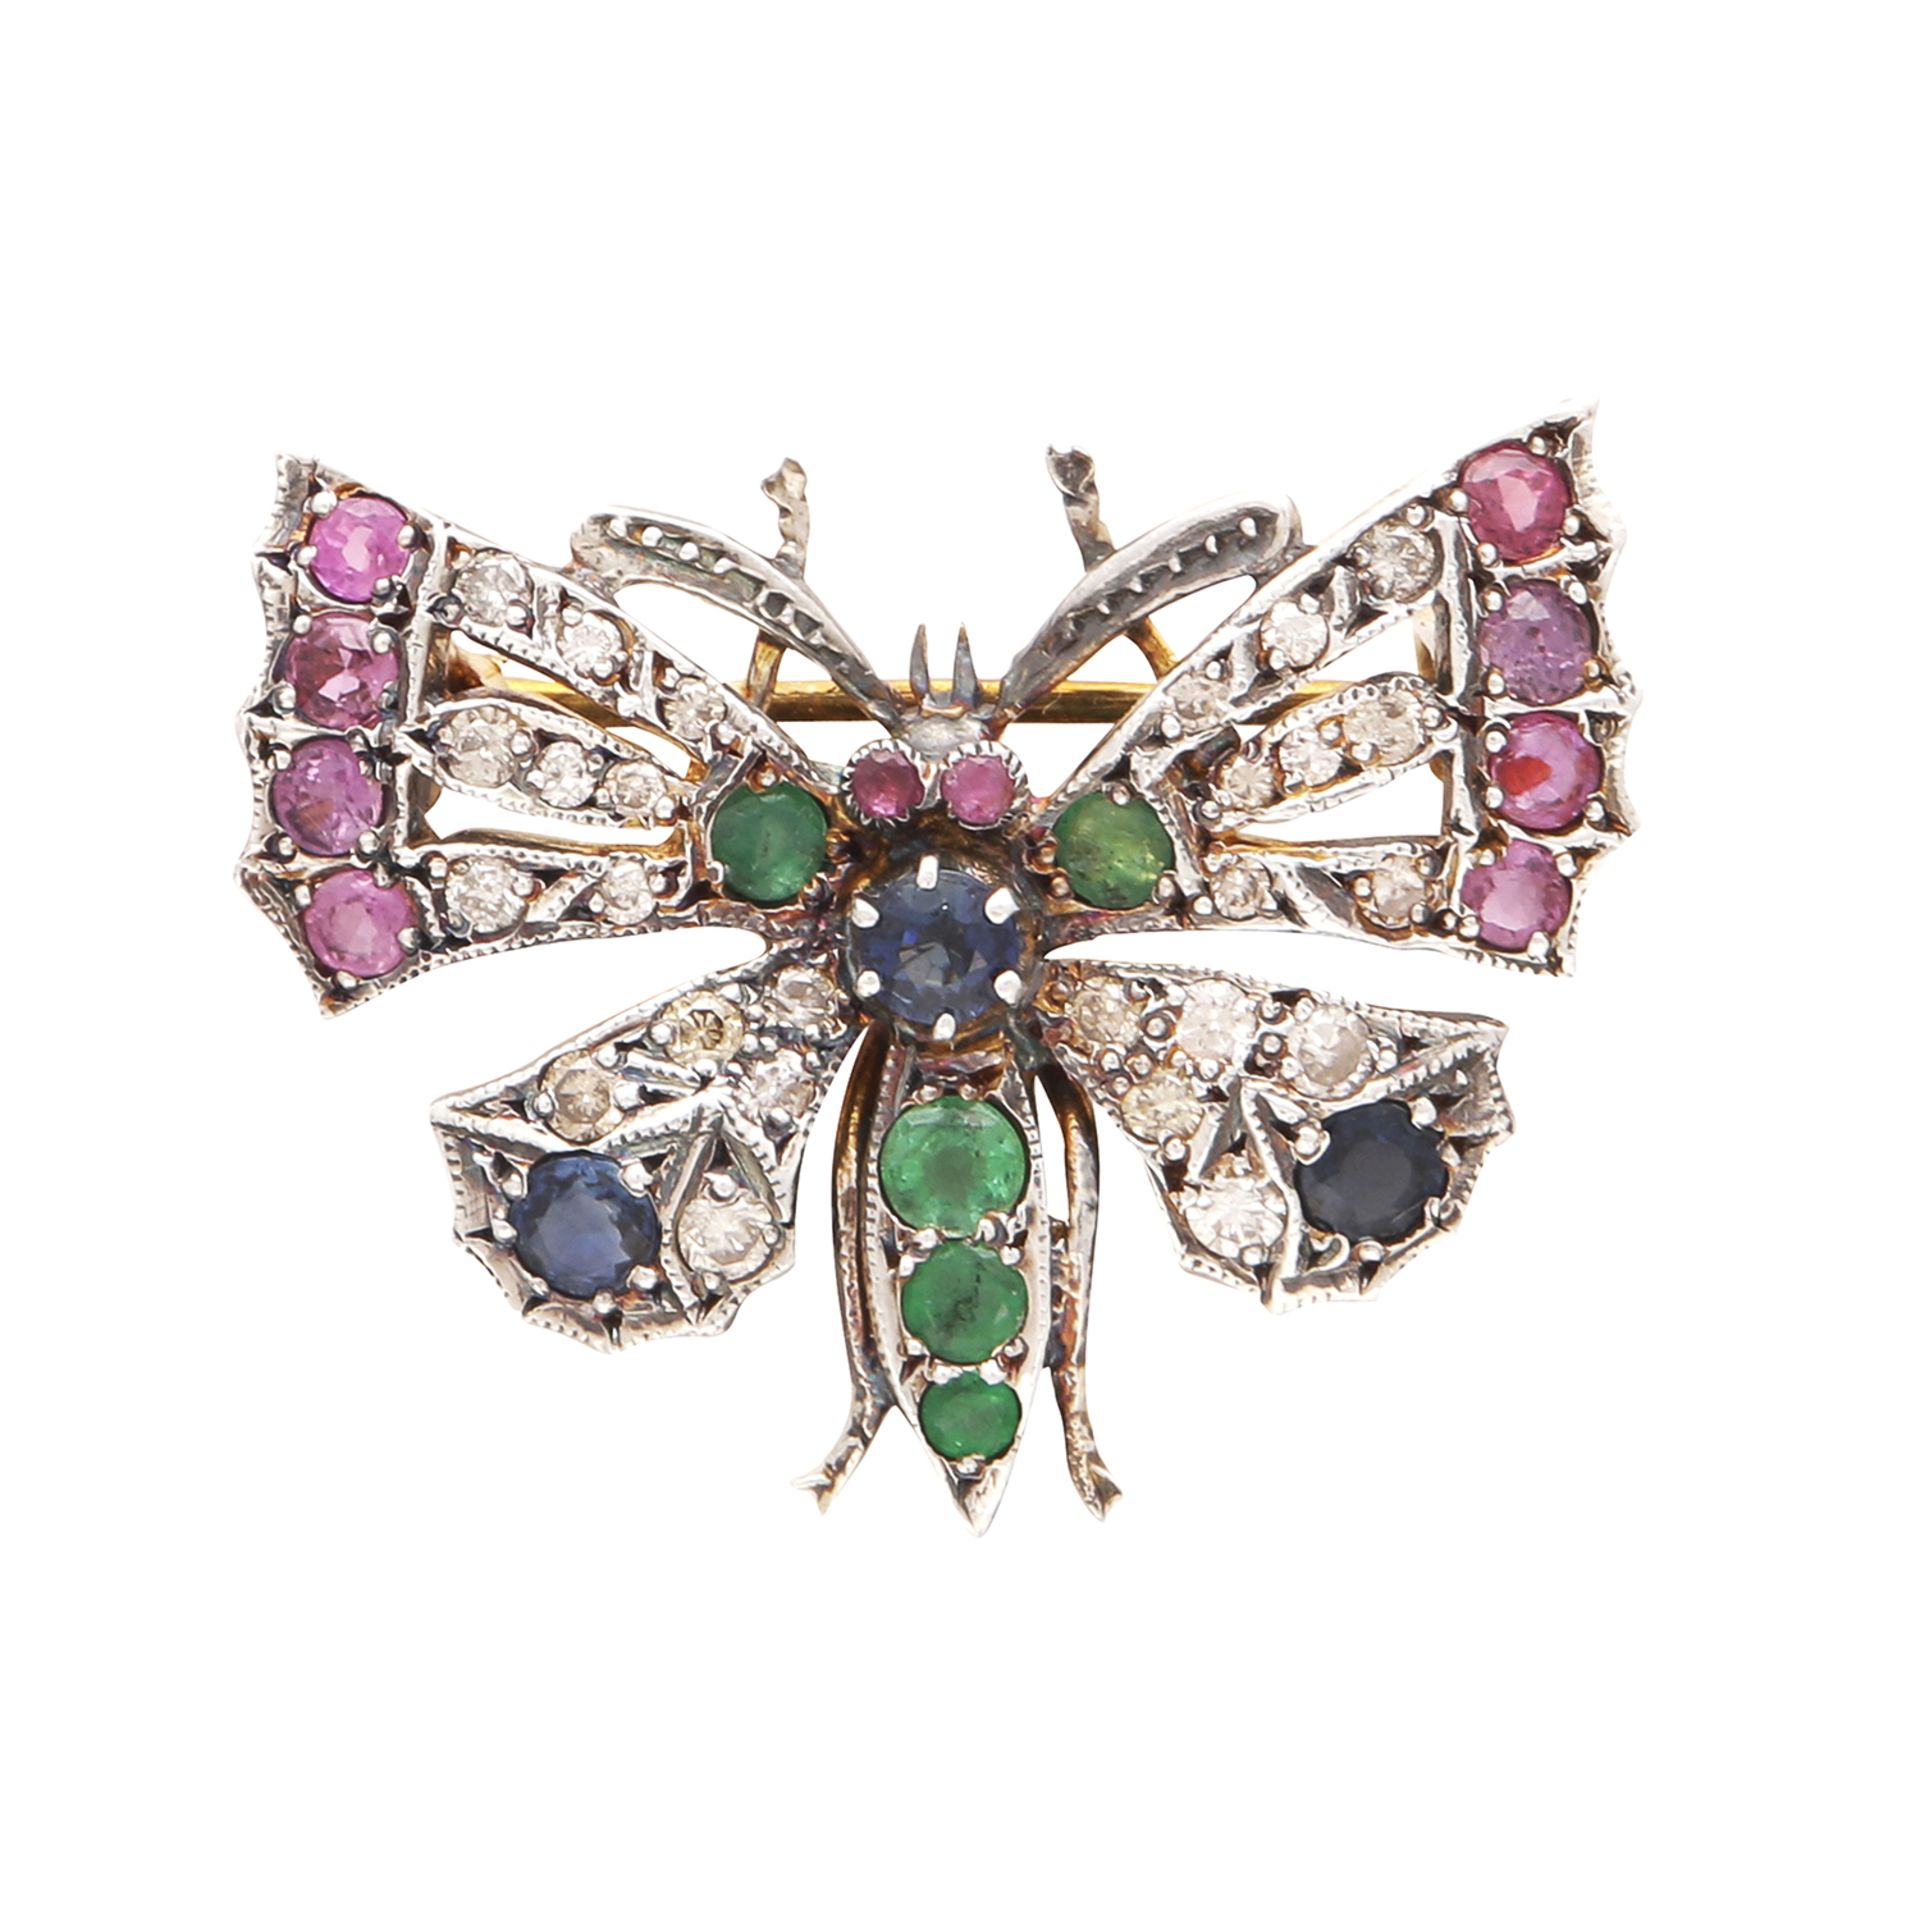 A RUBY, EMERALD, SAPPHIRE AND DIAMOND BUTTERFLY BROOCH in yellow gold and silver designed as a